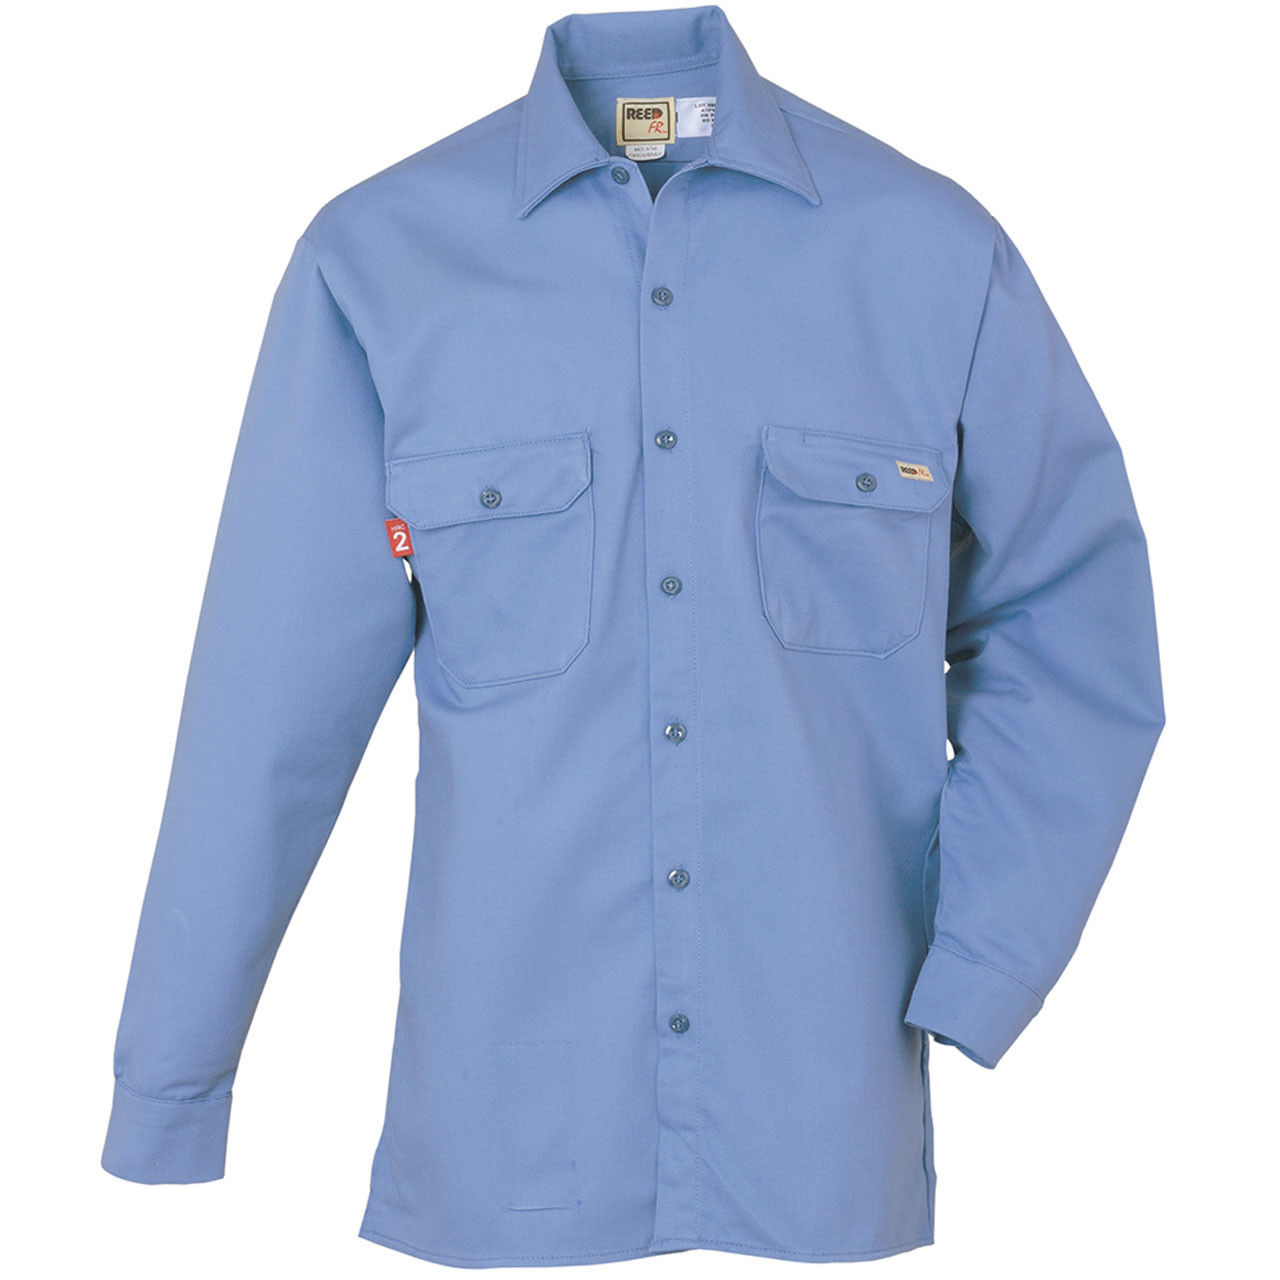 What type of thread is used to enhance the flame resistance of these work shirts?